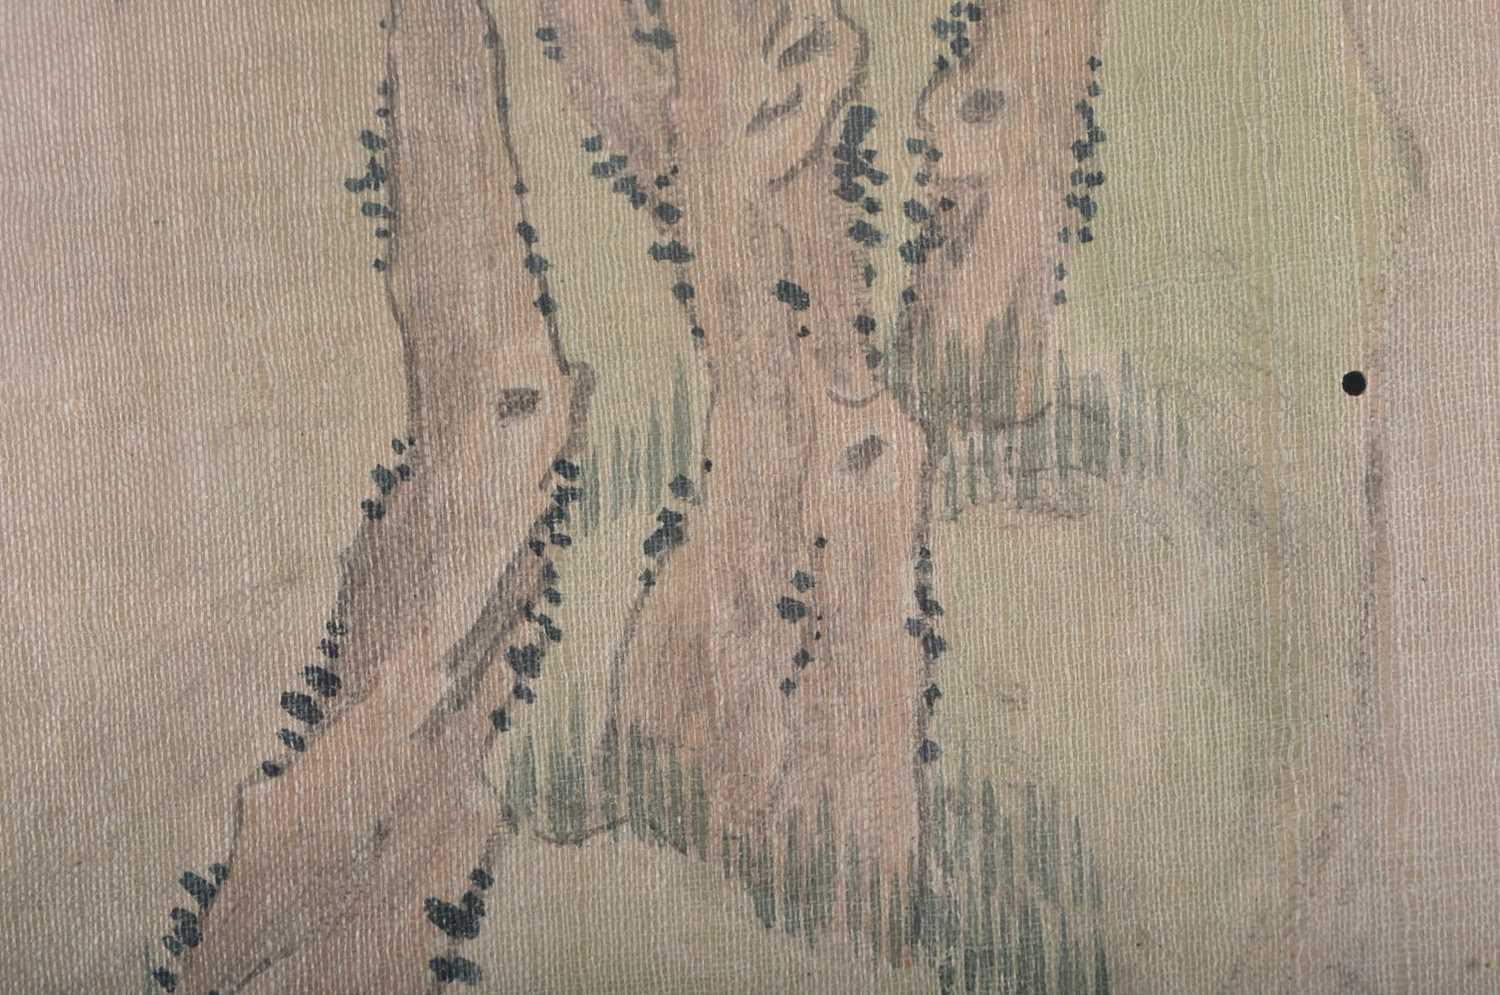 Attributed to Qian Hui'an (1833-1911) 3 x Watercolours, Figures within landscapes. 60 cm x 42 cm. - Image 18 of 38